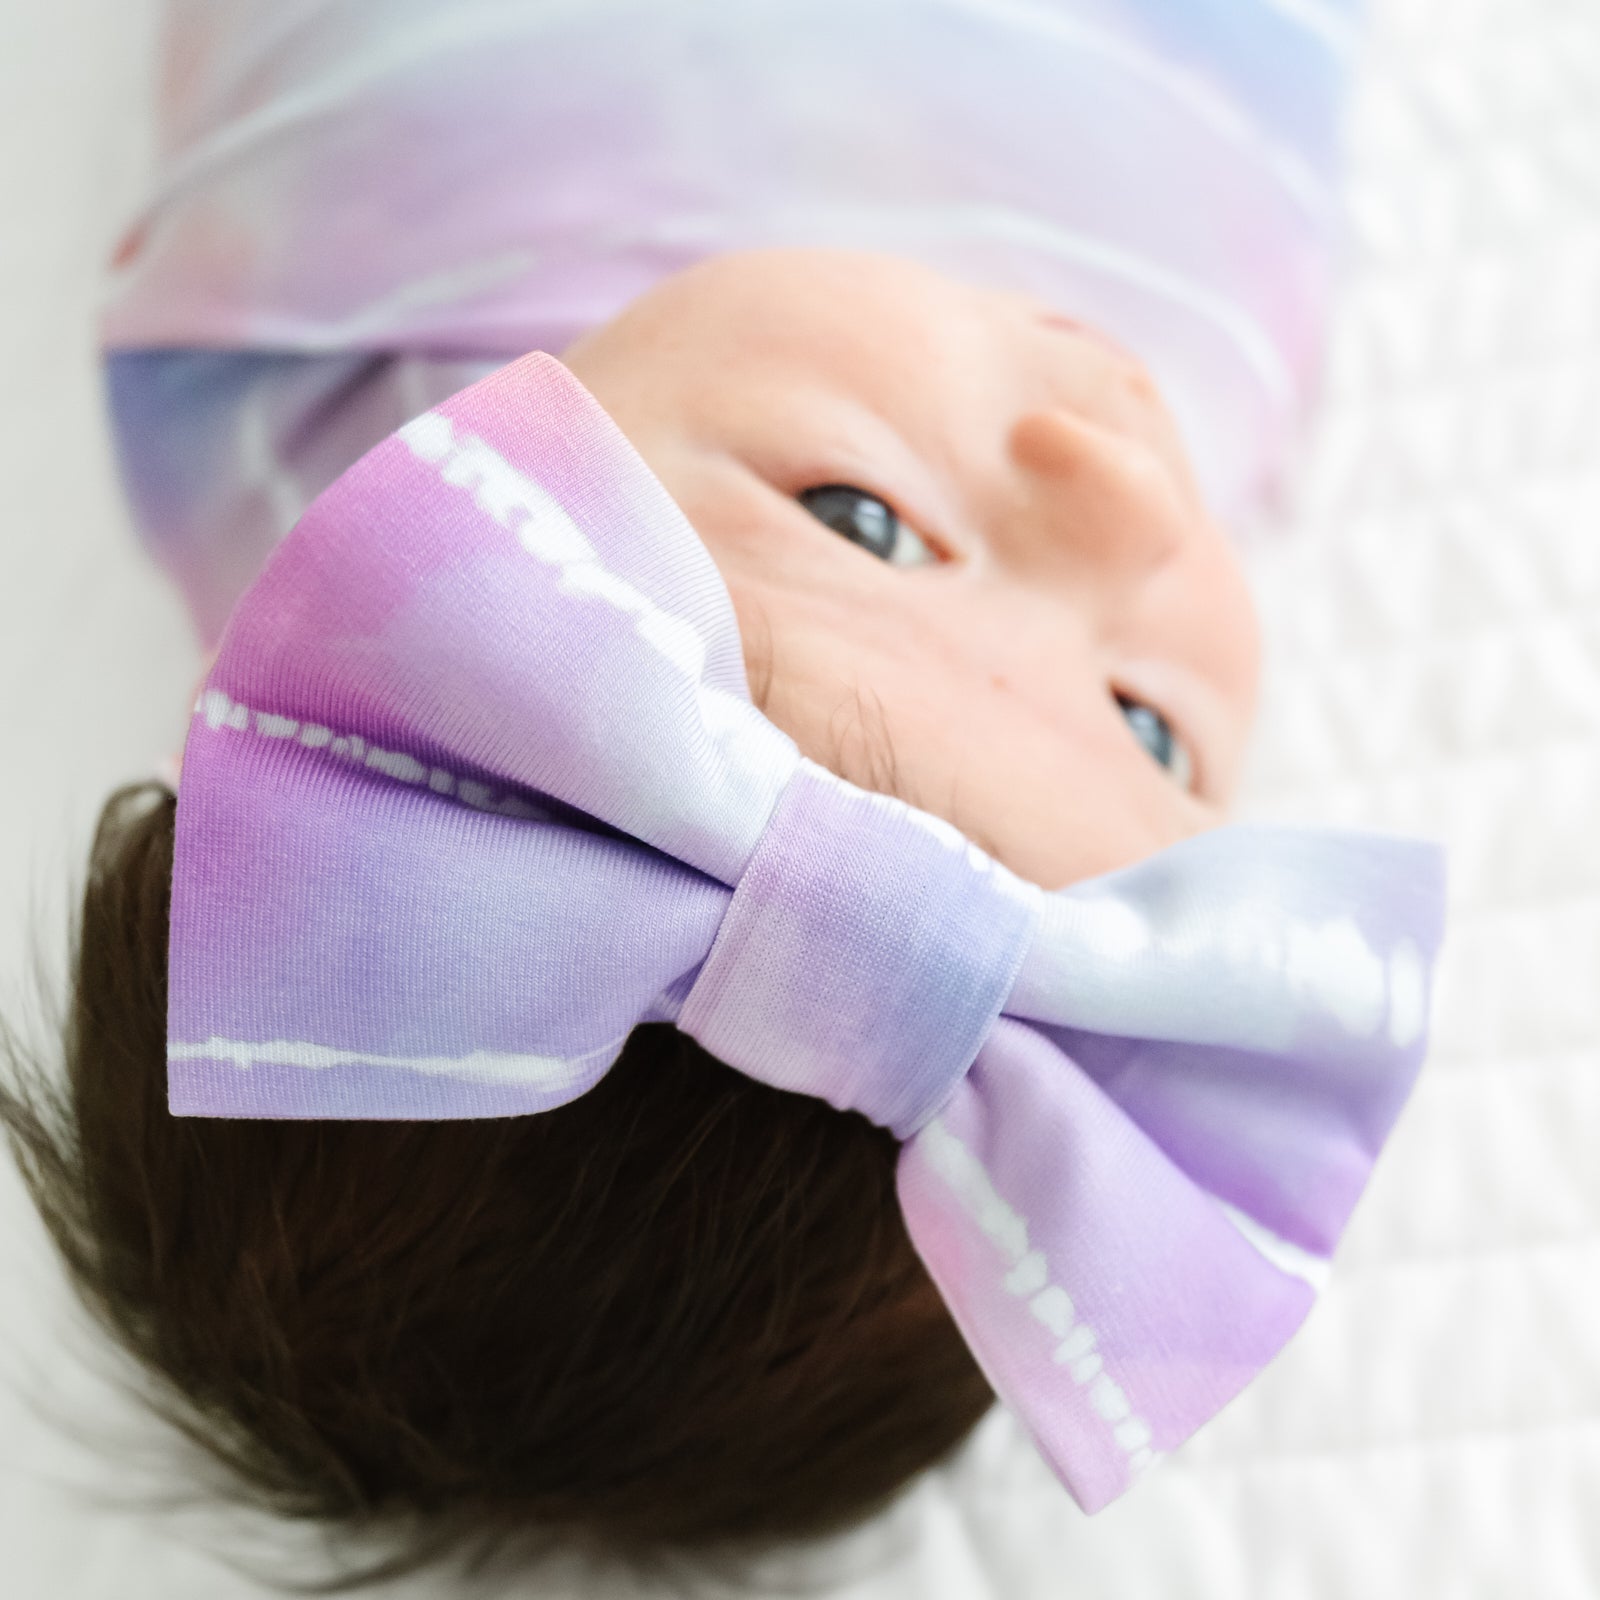 Close up image of an infant swaddled in a Pastel Tie Dye Dreams swaddle & luxe bow headband set, detailing the luxe bow headband